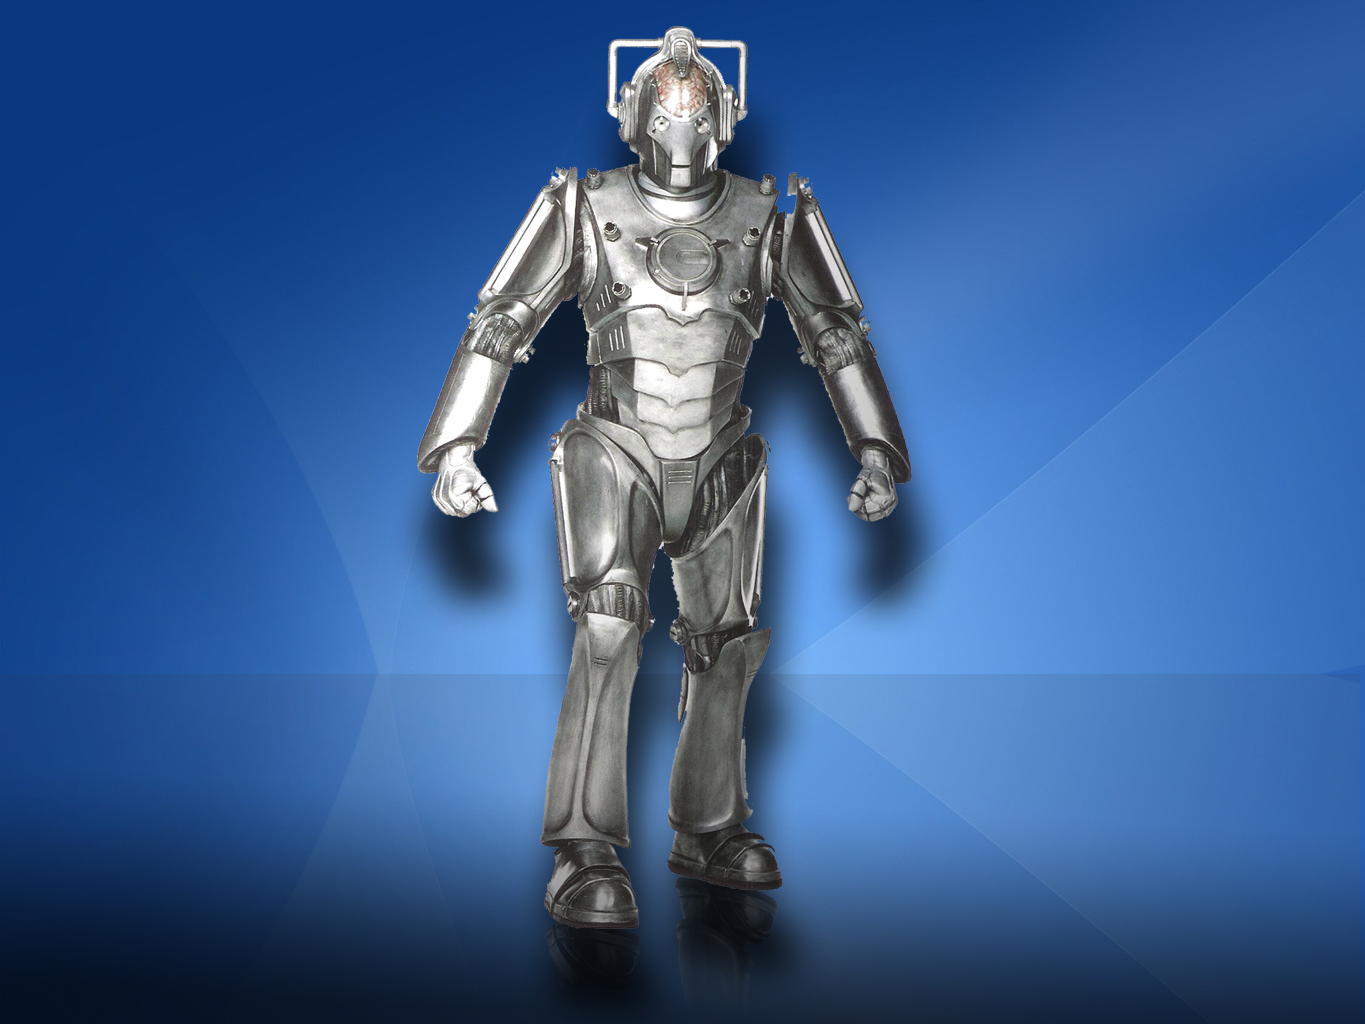 vertical wallpaper tv show, doctor who, cyberman (doctor who)